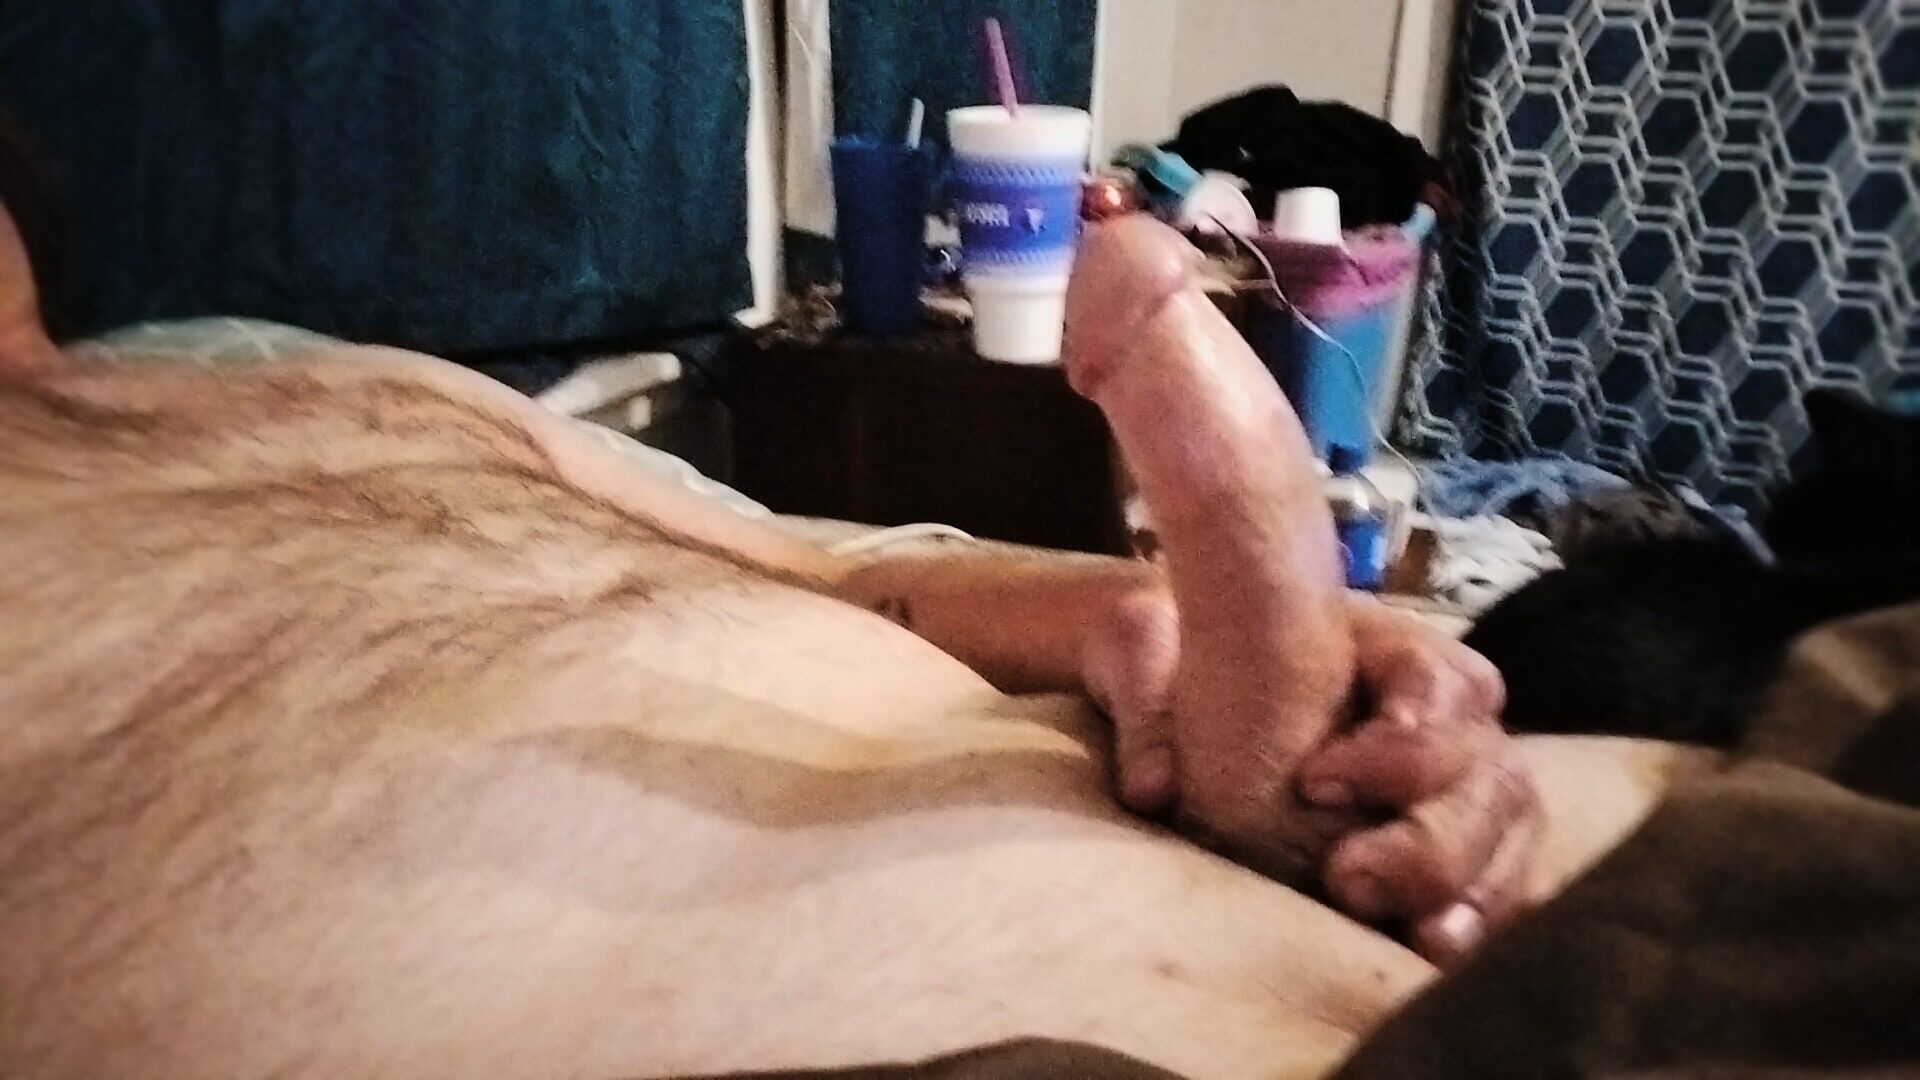 My spun self and I want any and all cocks! #22